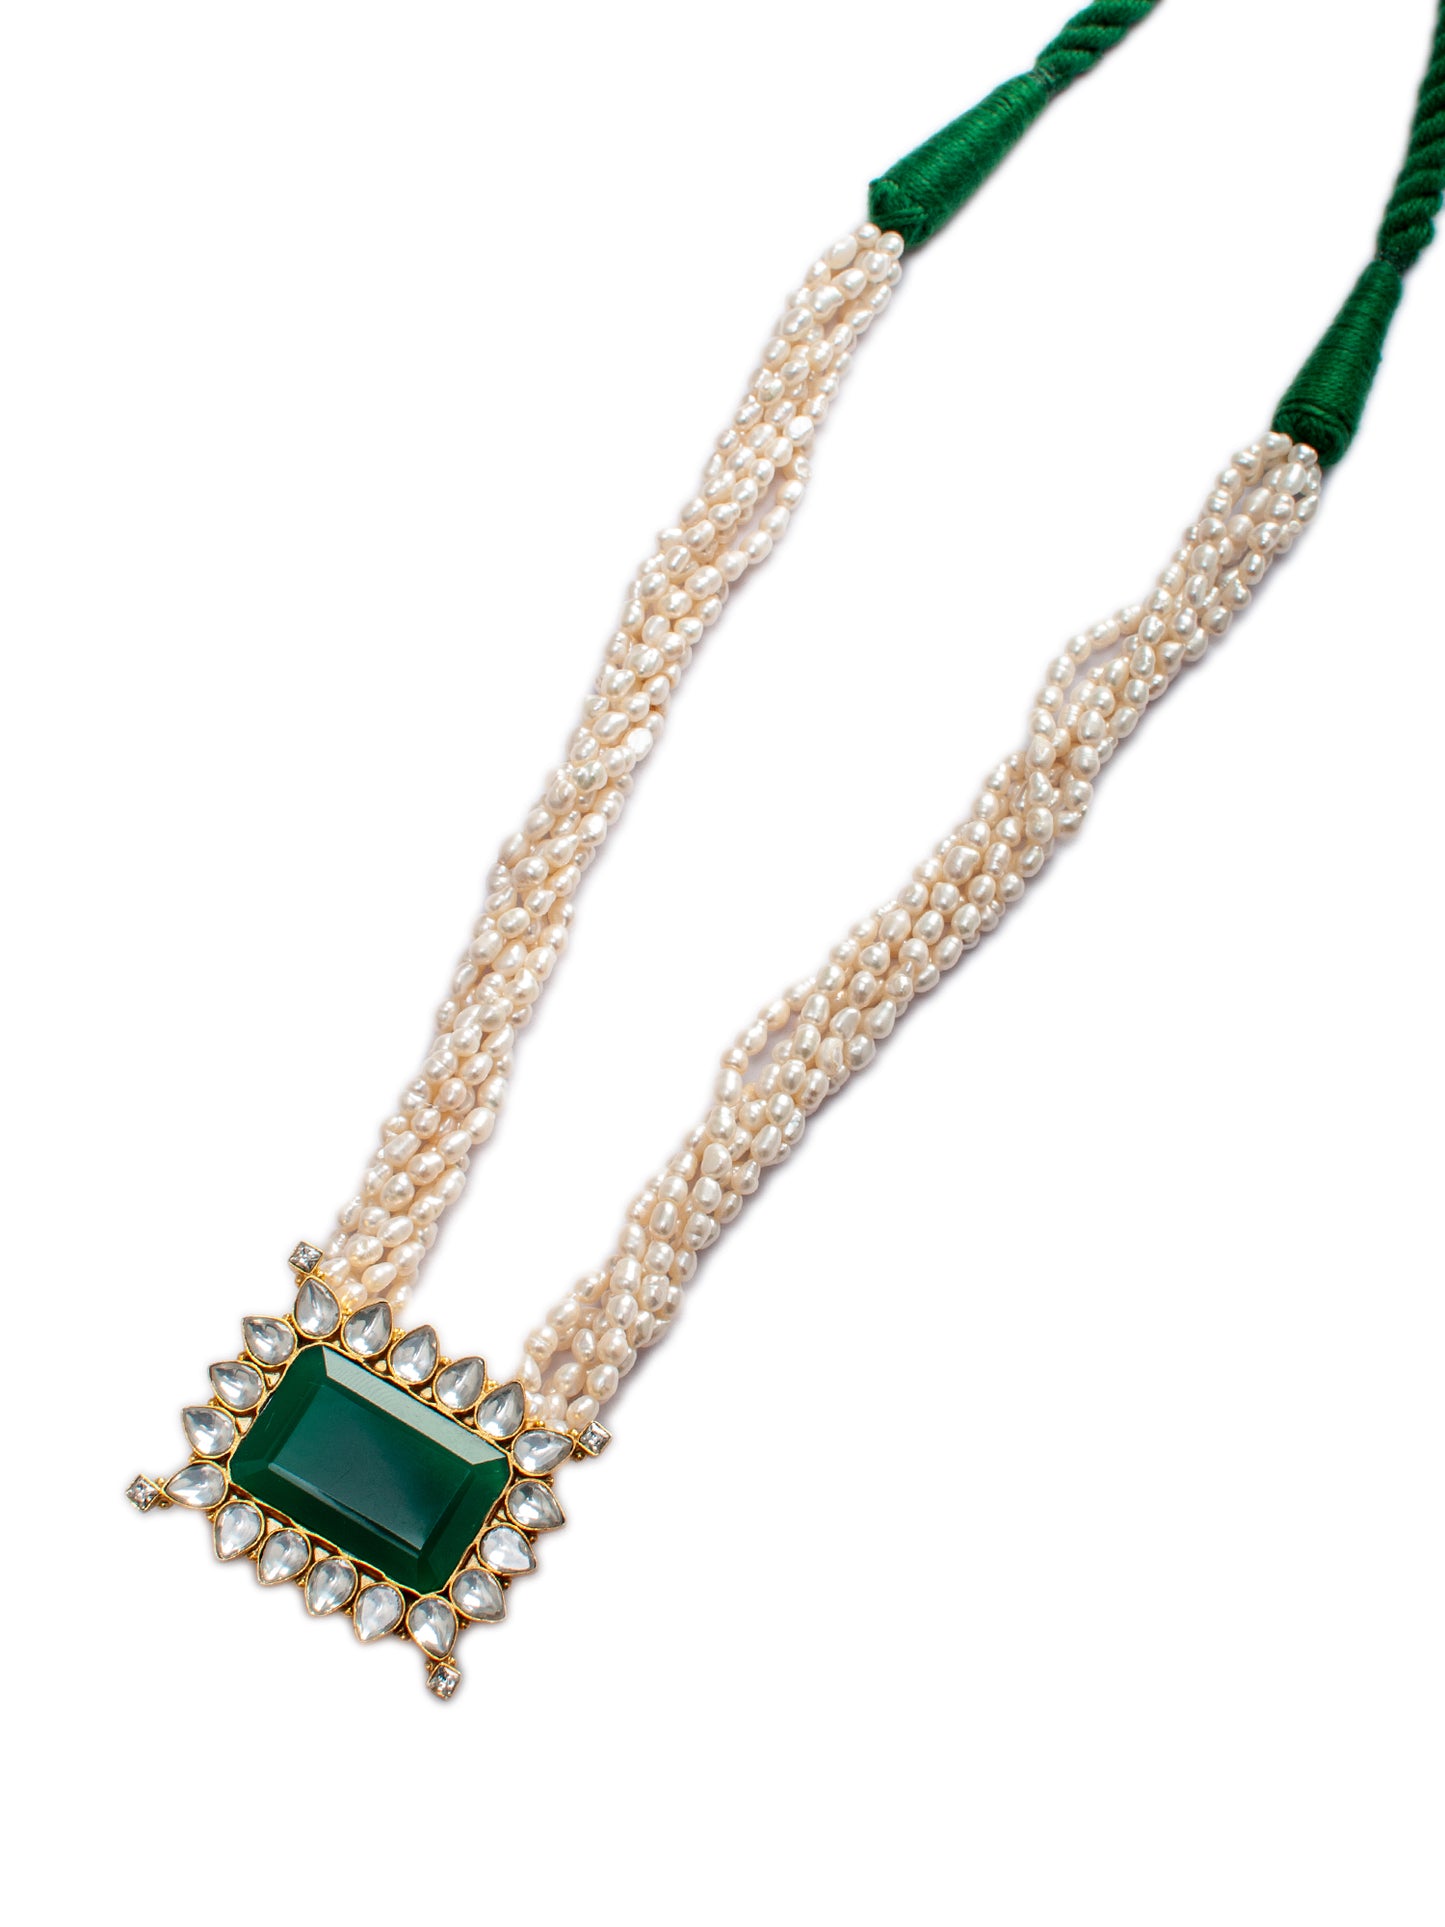 925 Sterling Silver 22K Gold Plated Pearl Beaded Necklace With Green Onyx Gemstone and White Kundan